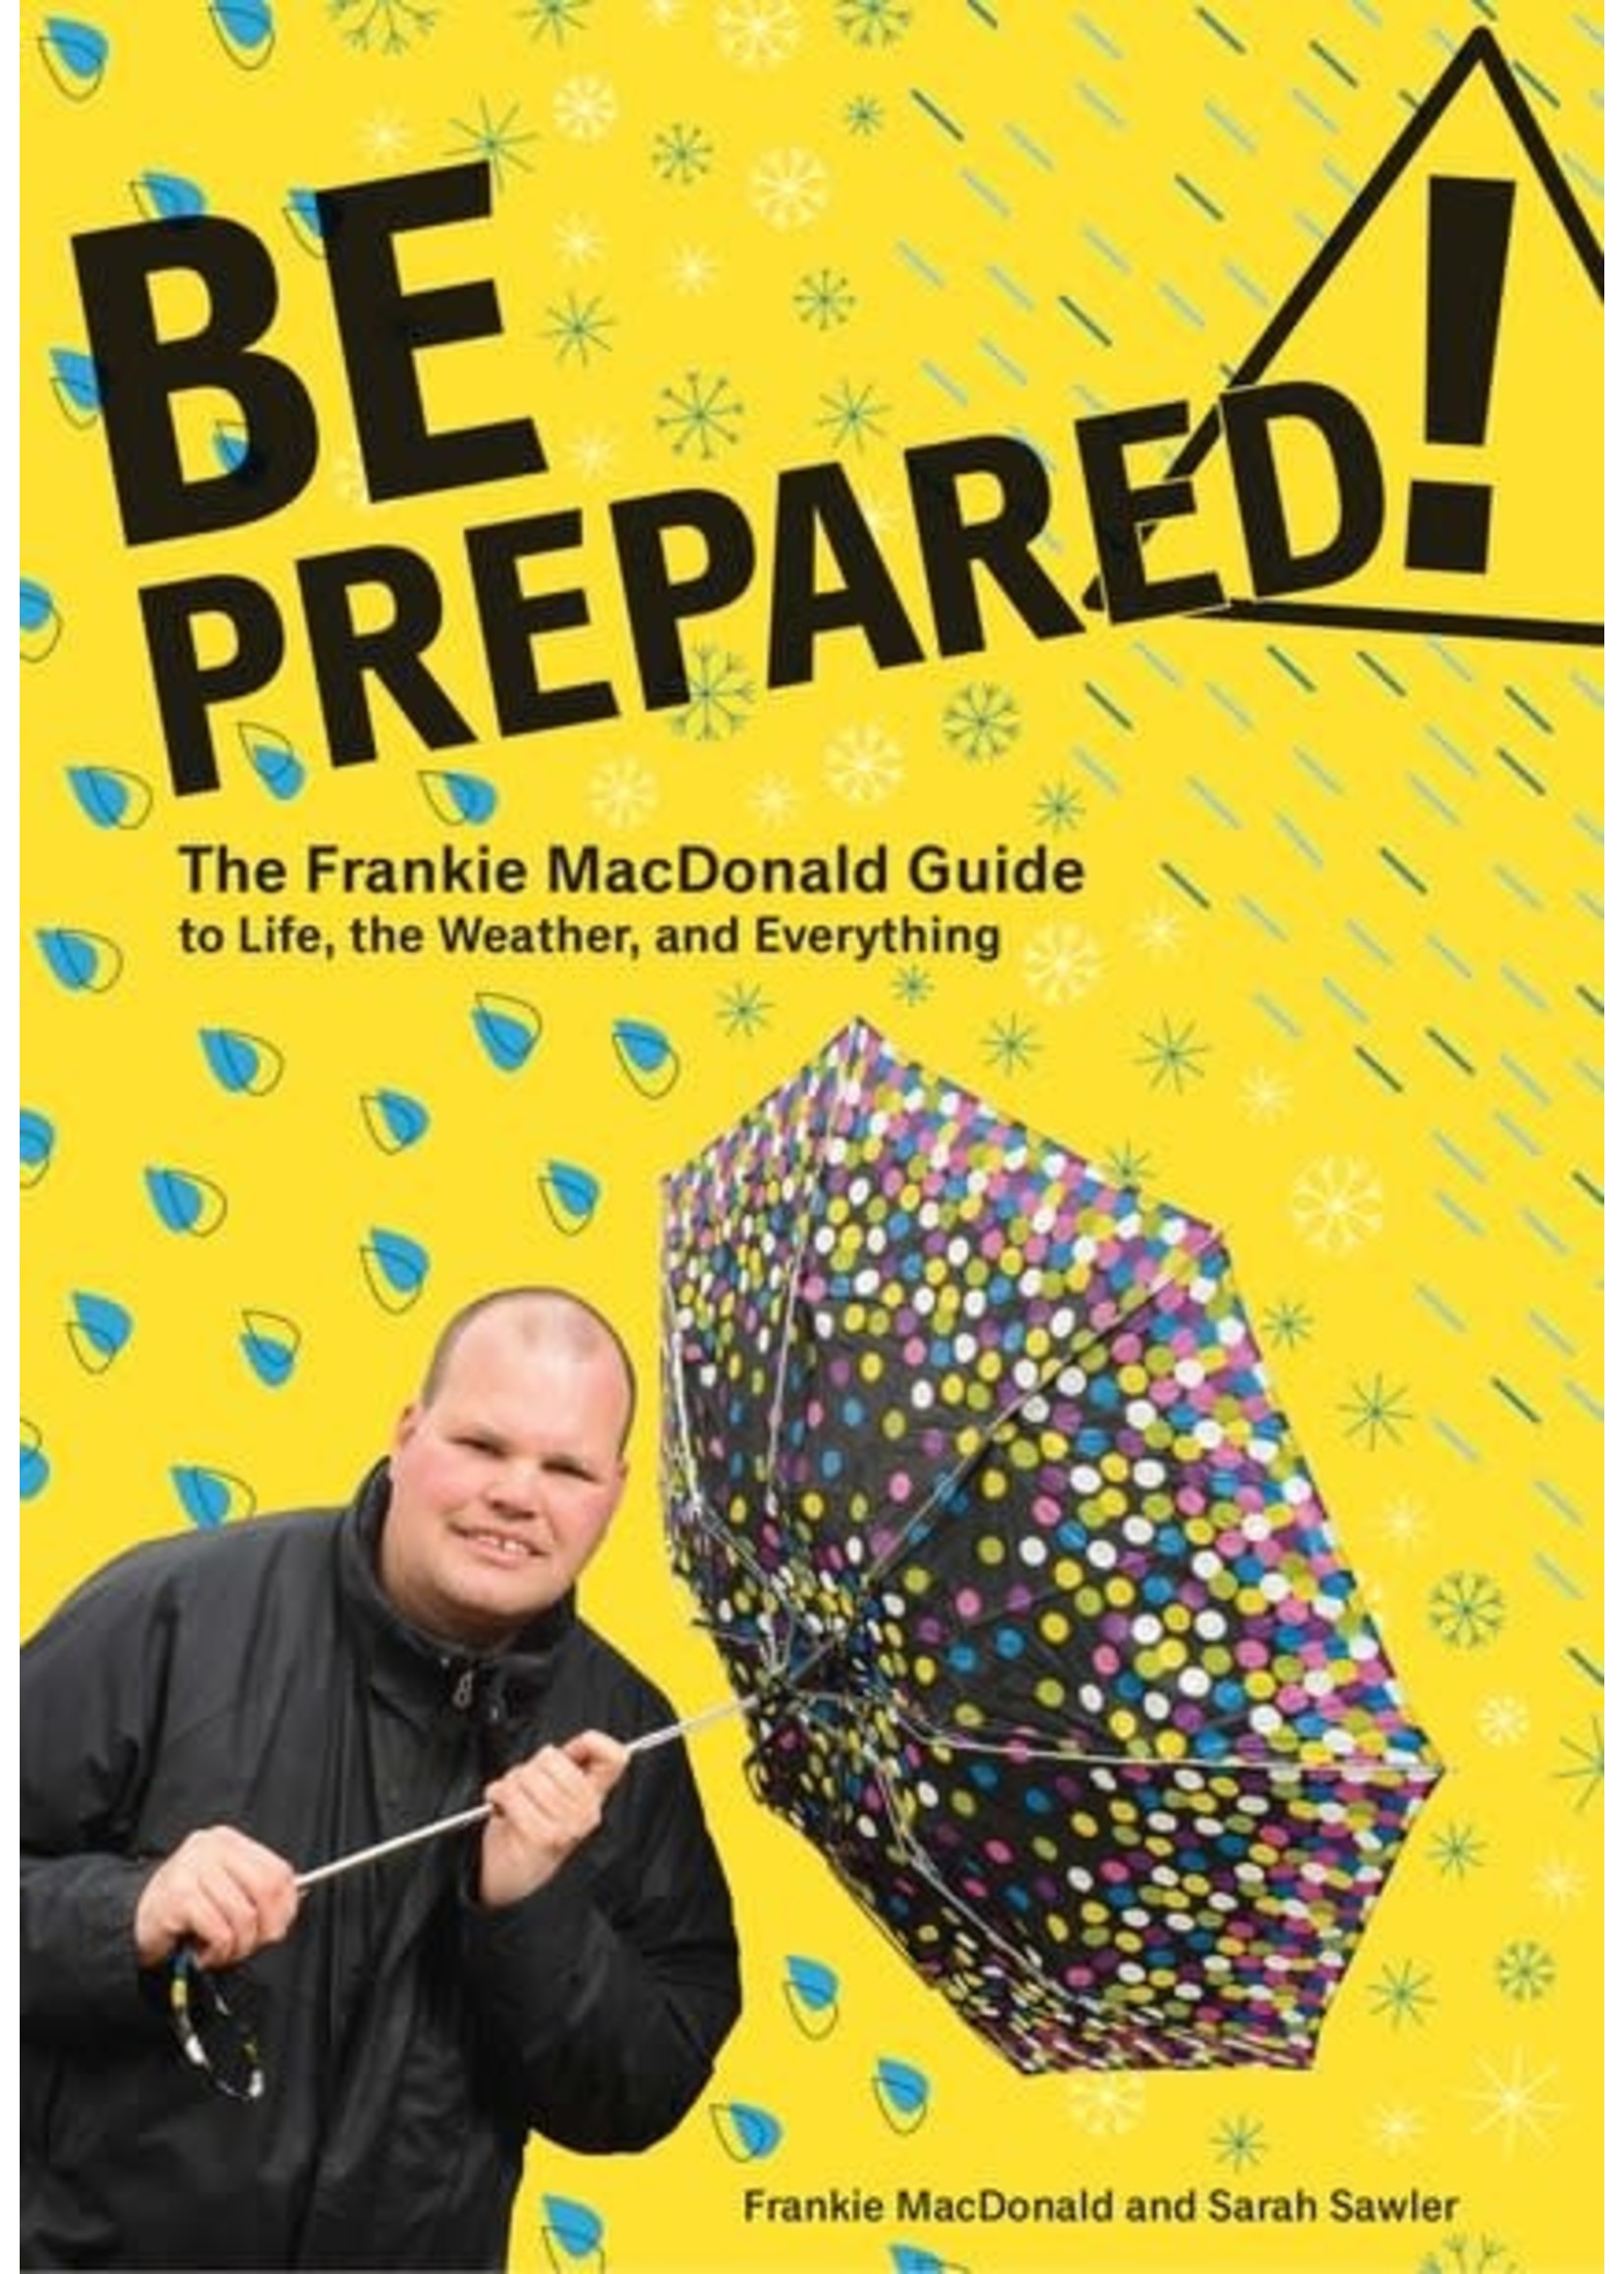 Be Prepared!: The Frankie MacDonald Guide to Life, the Weather, and Everything by Frankie MacDonald, Sarah Sawler